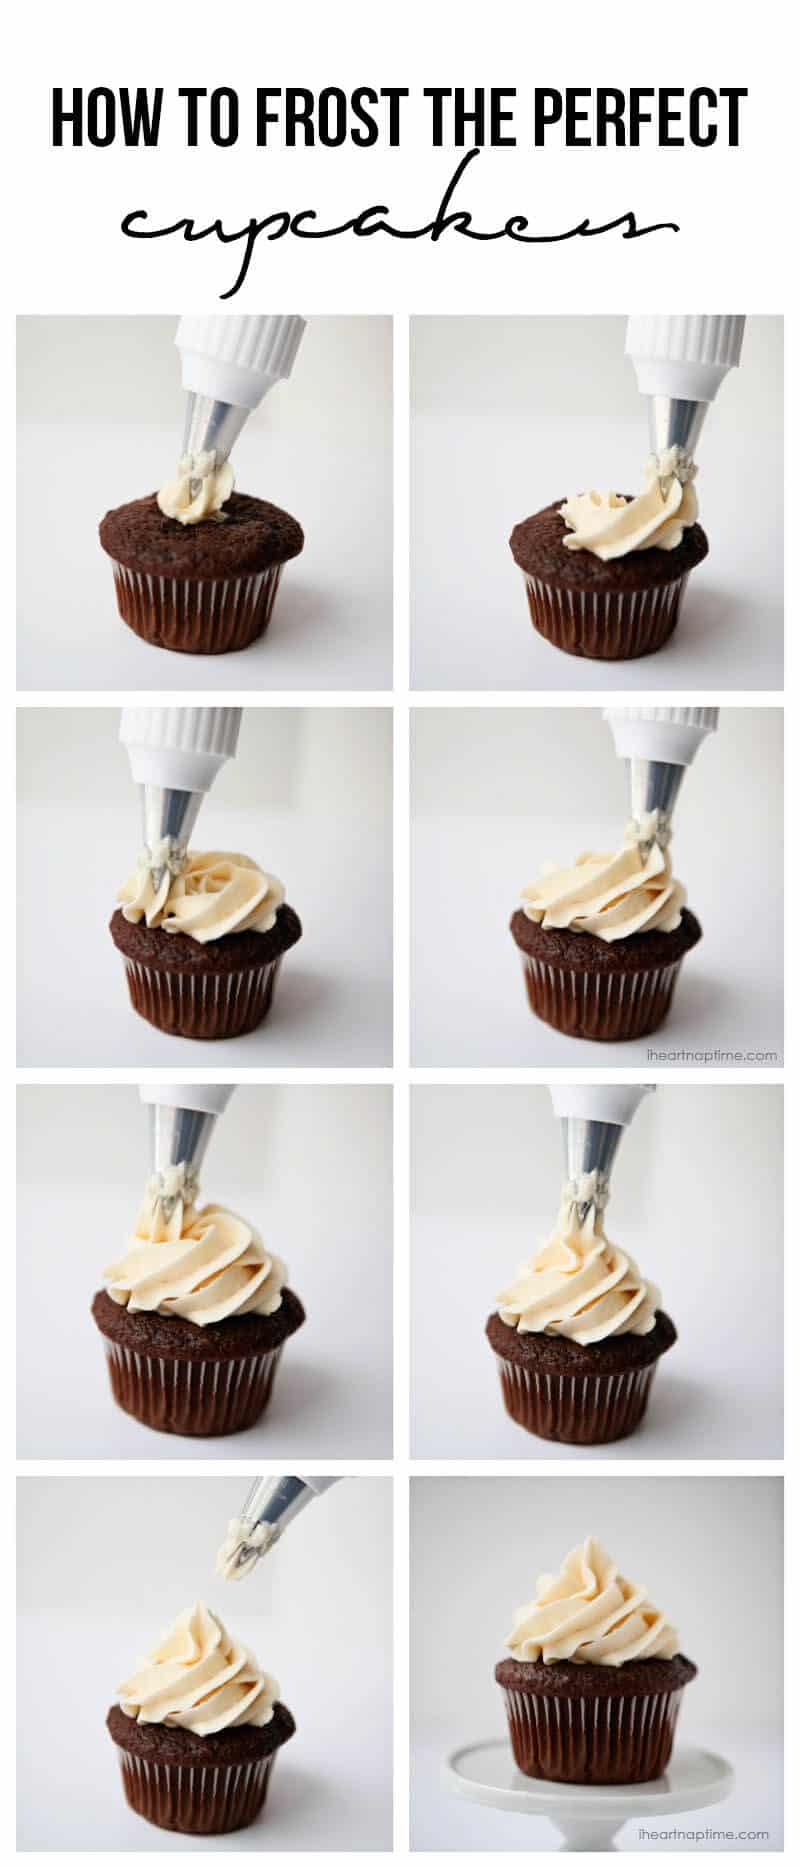 The process of frosting cupcakes in a collage.